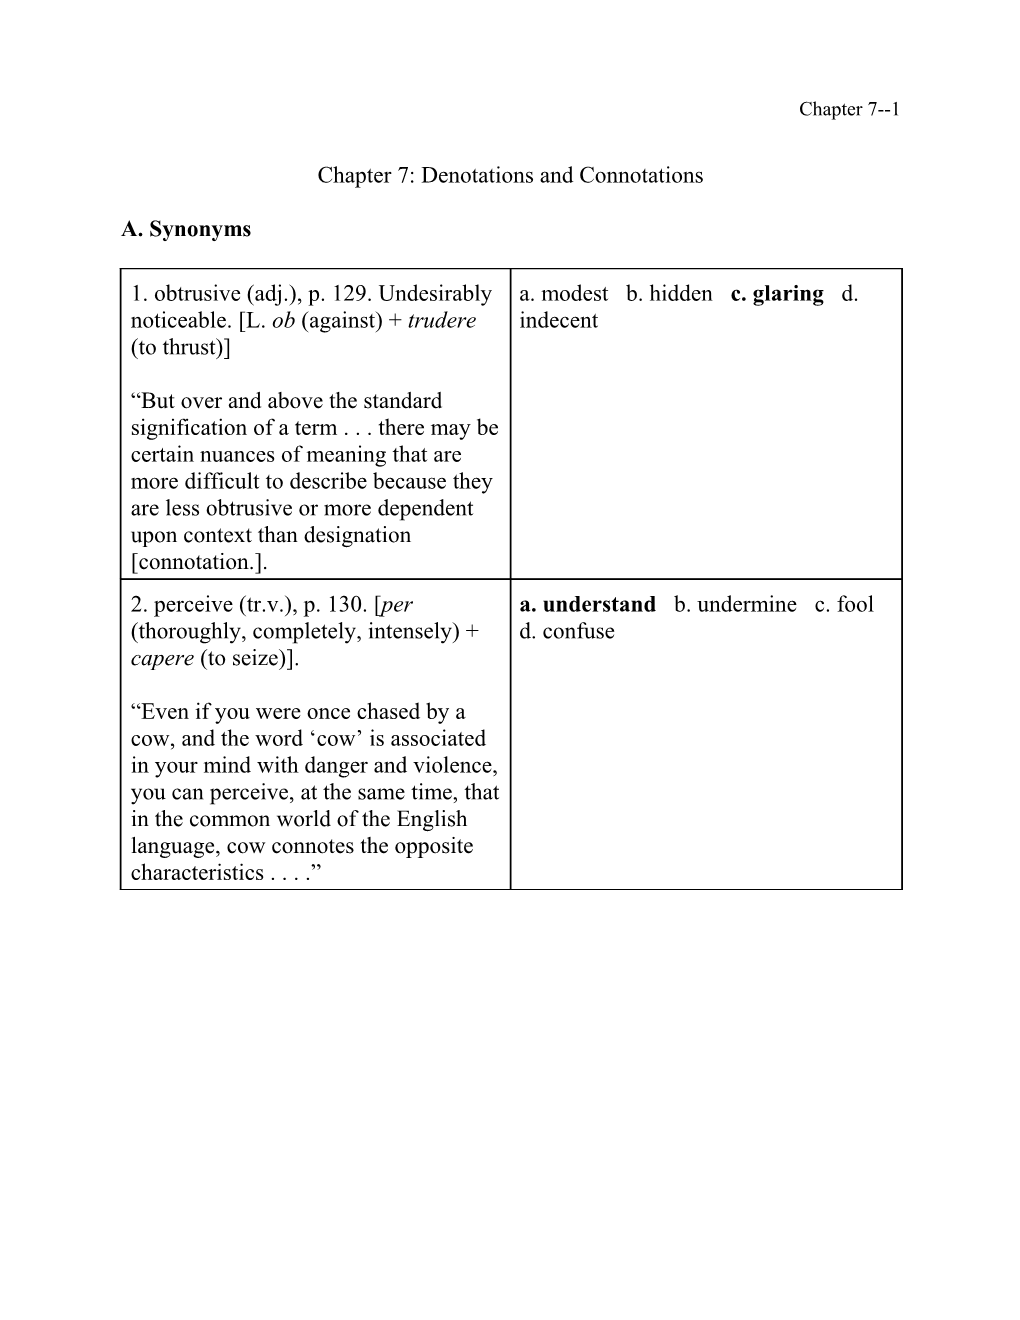 Chapter 7: Denotations and Connotations